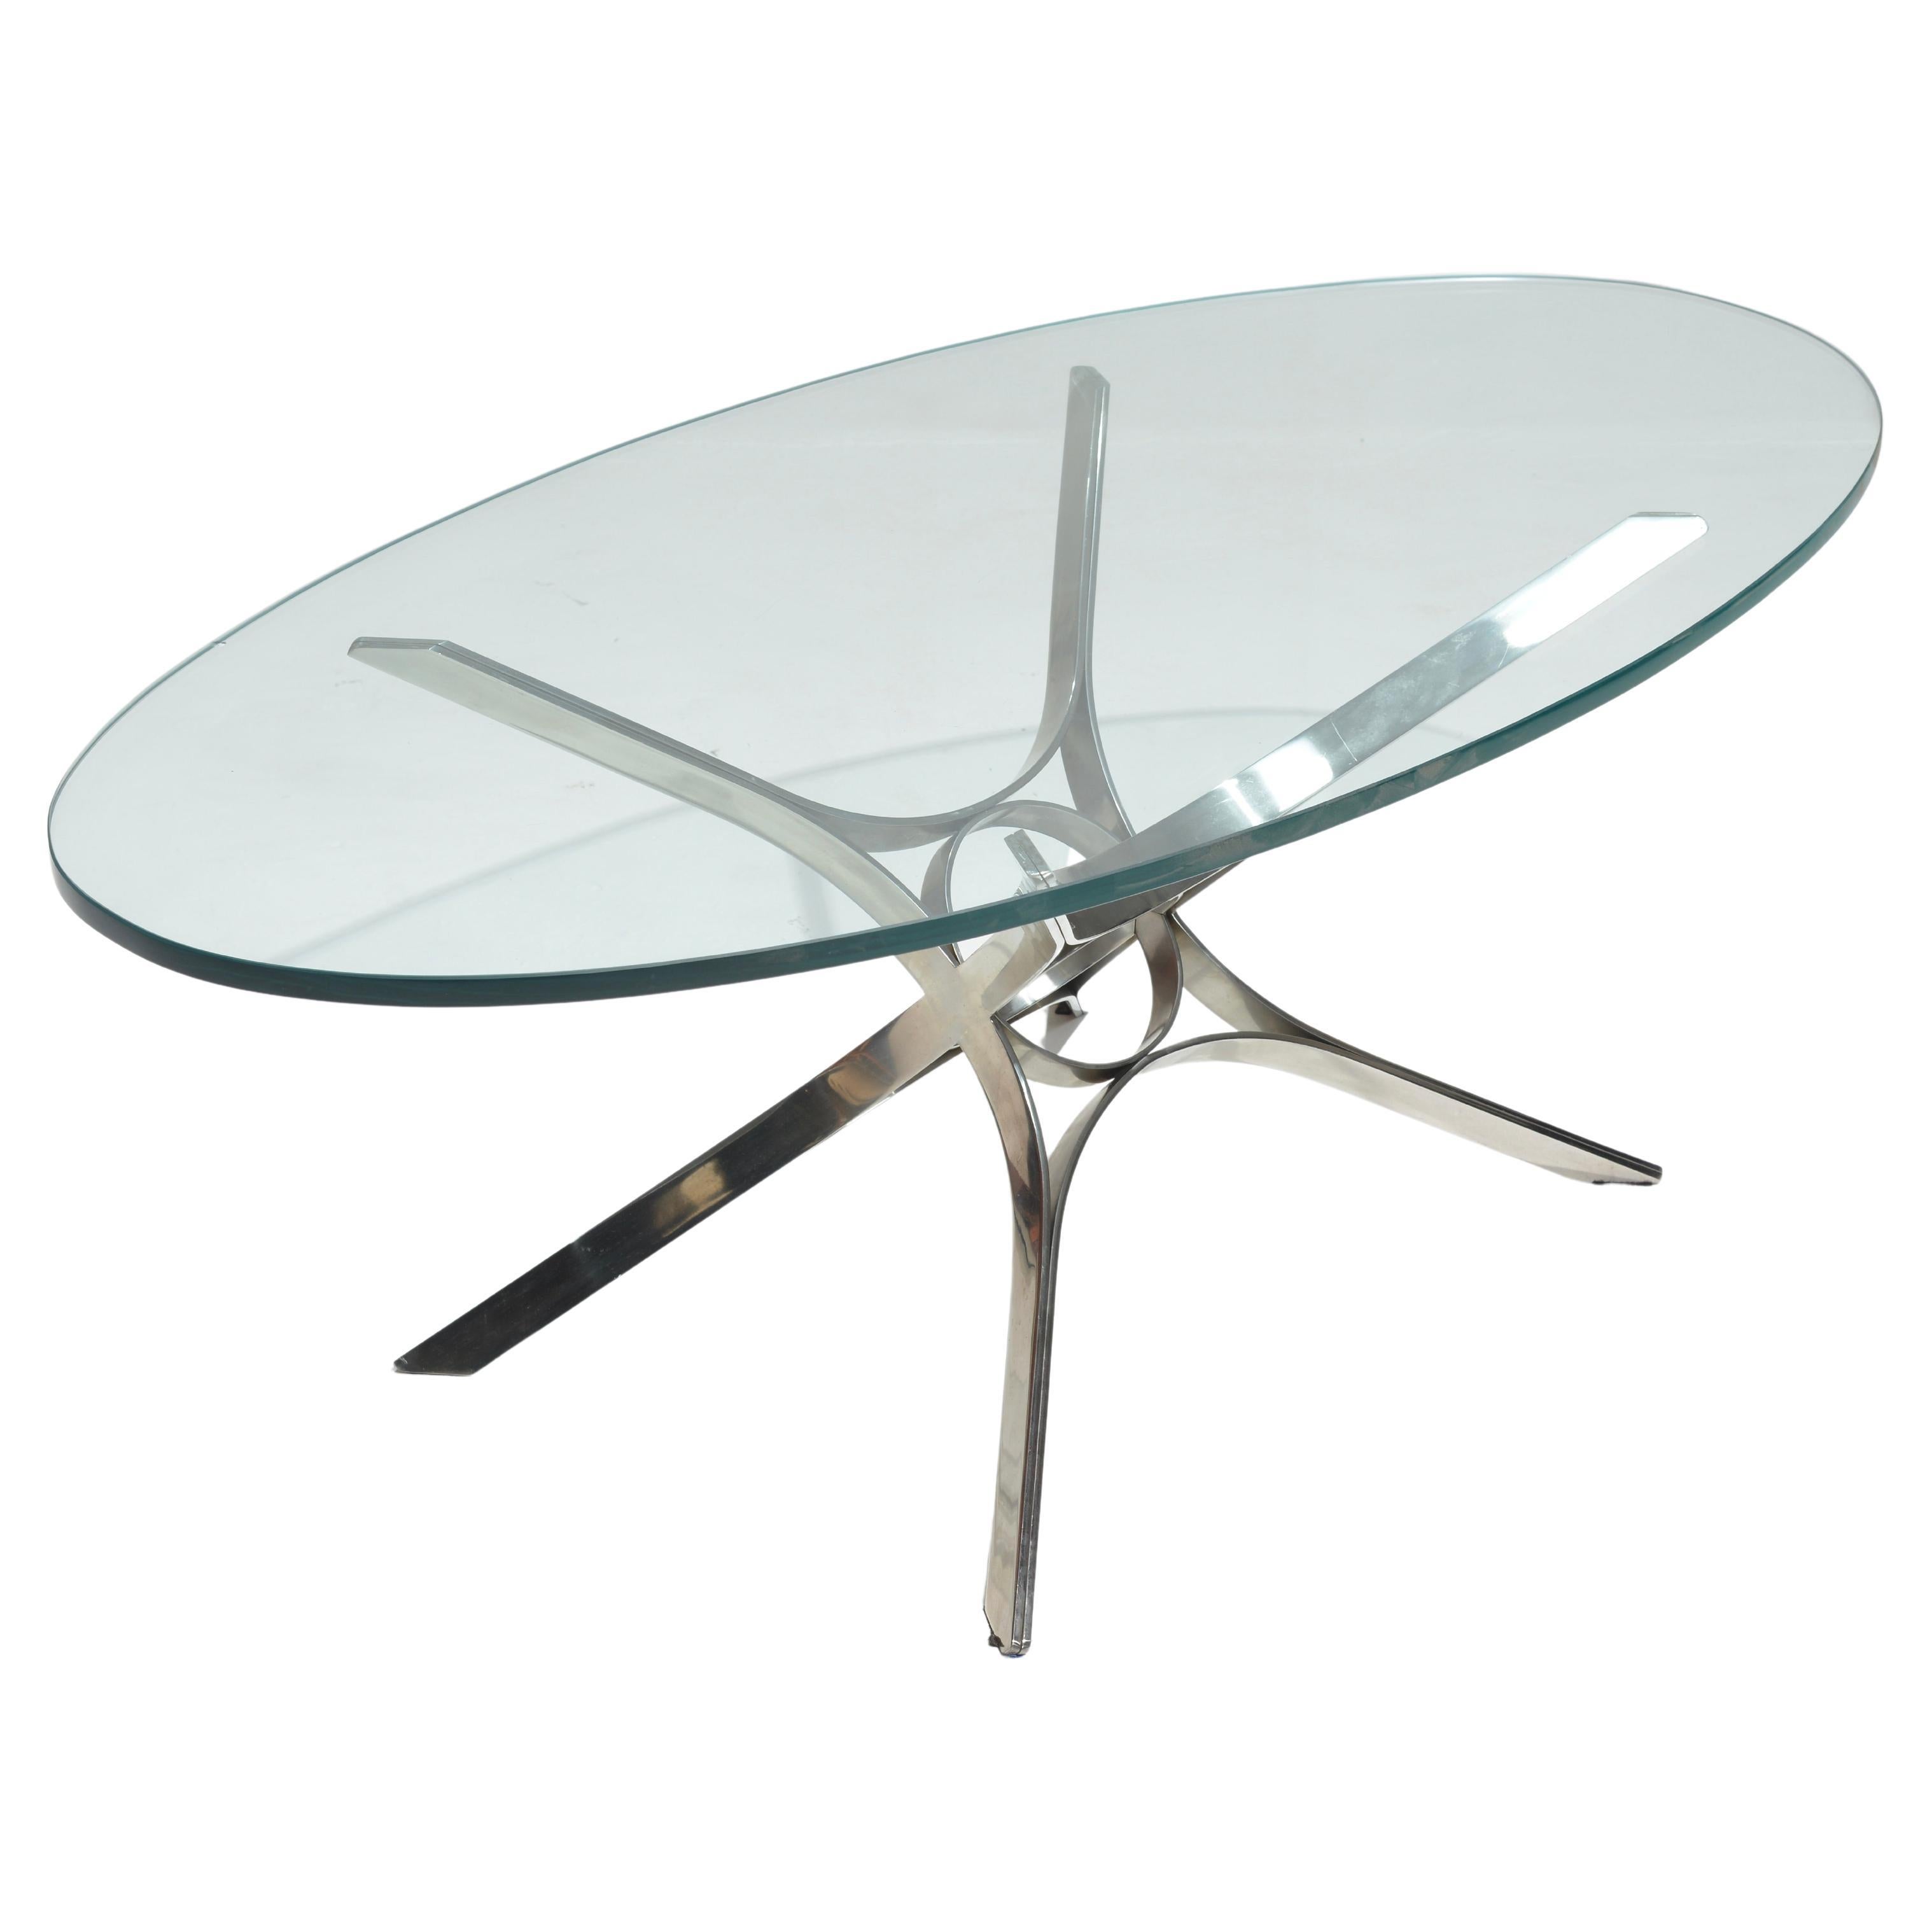 Roger Sprunger for Dunbar stainless steel and glass center table, 1970c. We have 2 in stock.
 